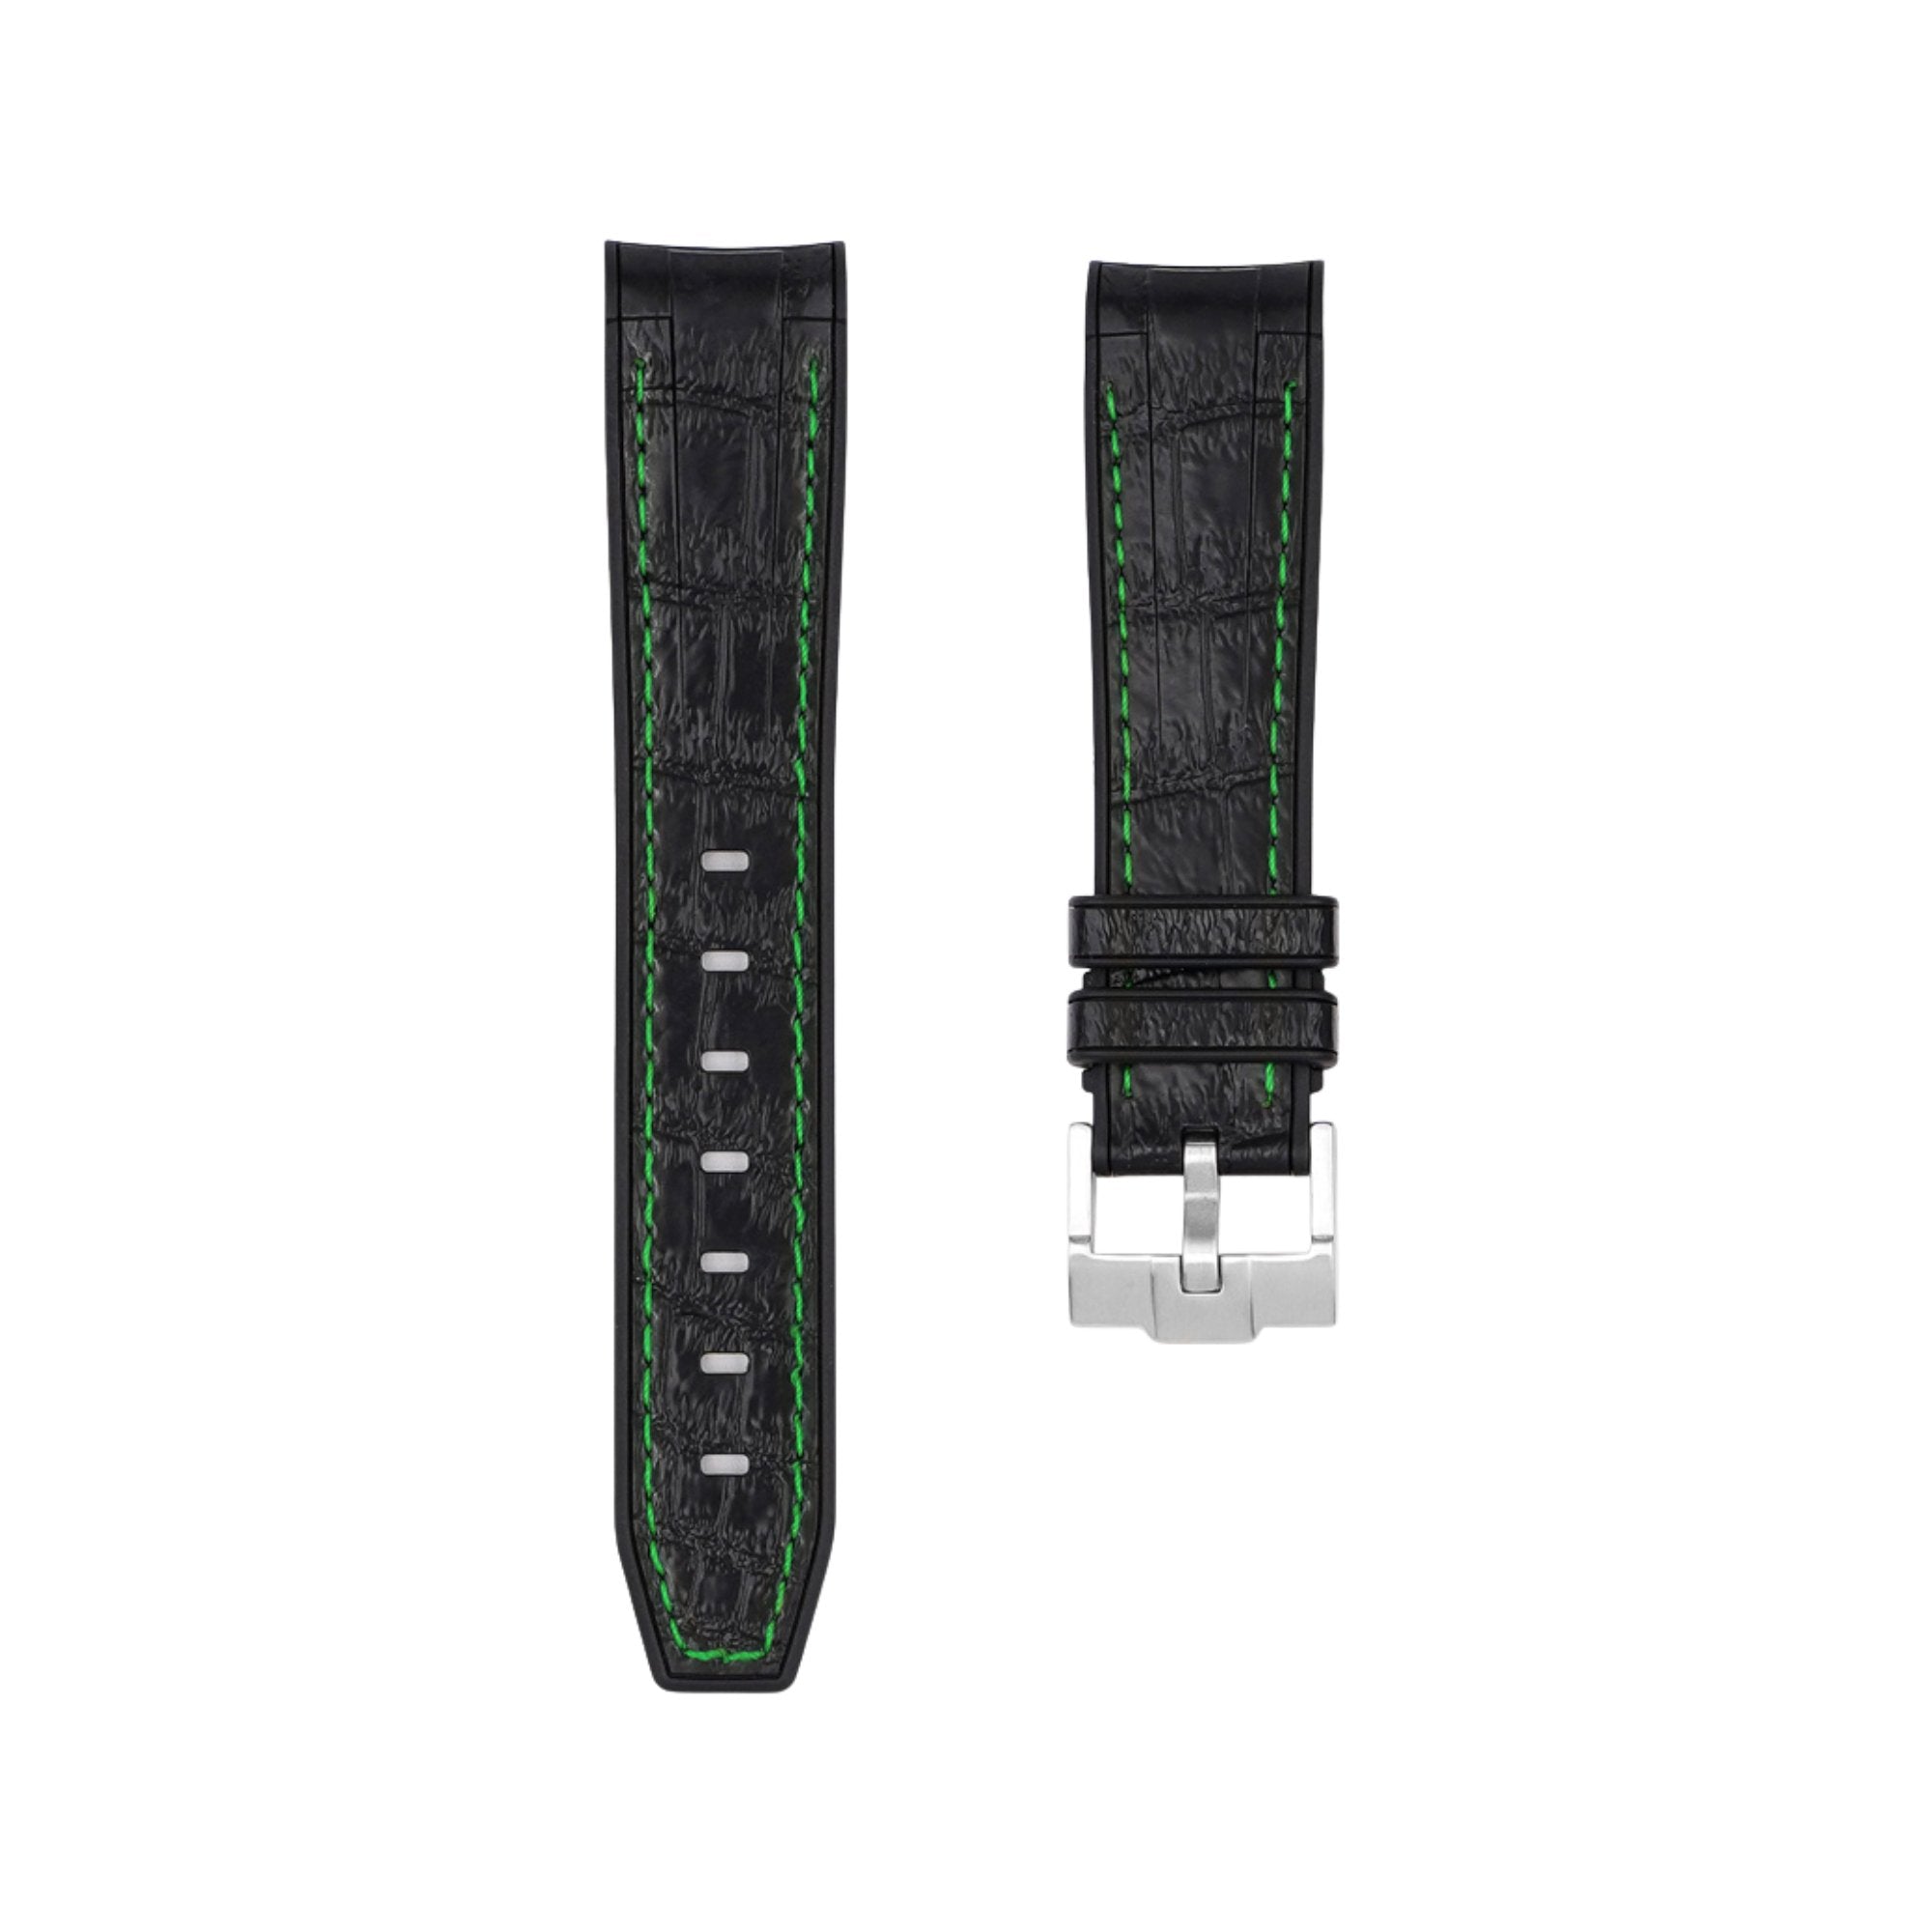 Alligator Embossed Curved End Premium Silicone Strap - Compatible with Omega Moonwatch - Black with Green Stitch (2406) -StrapSeeker